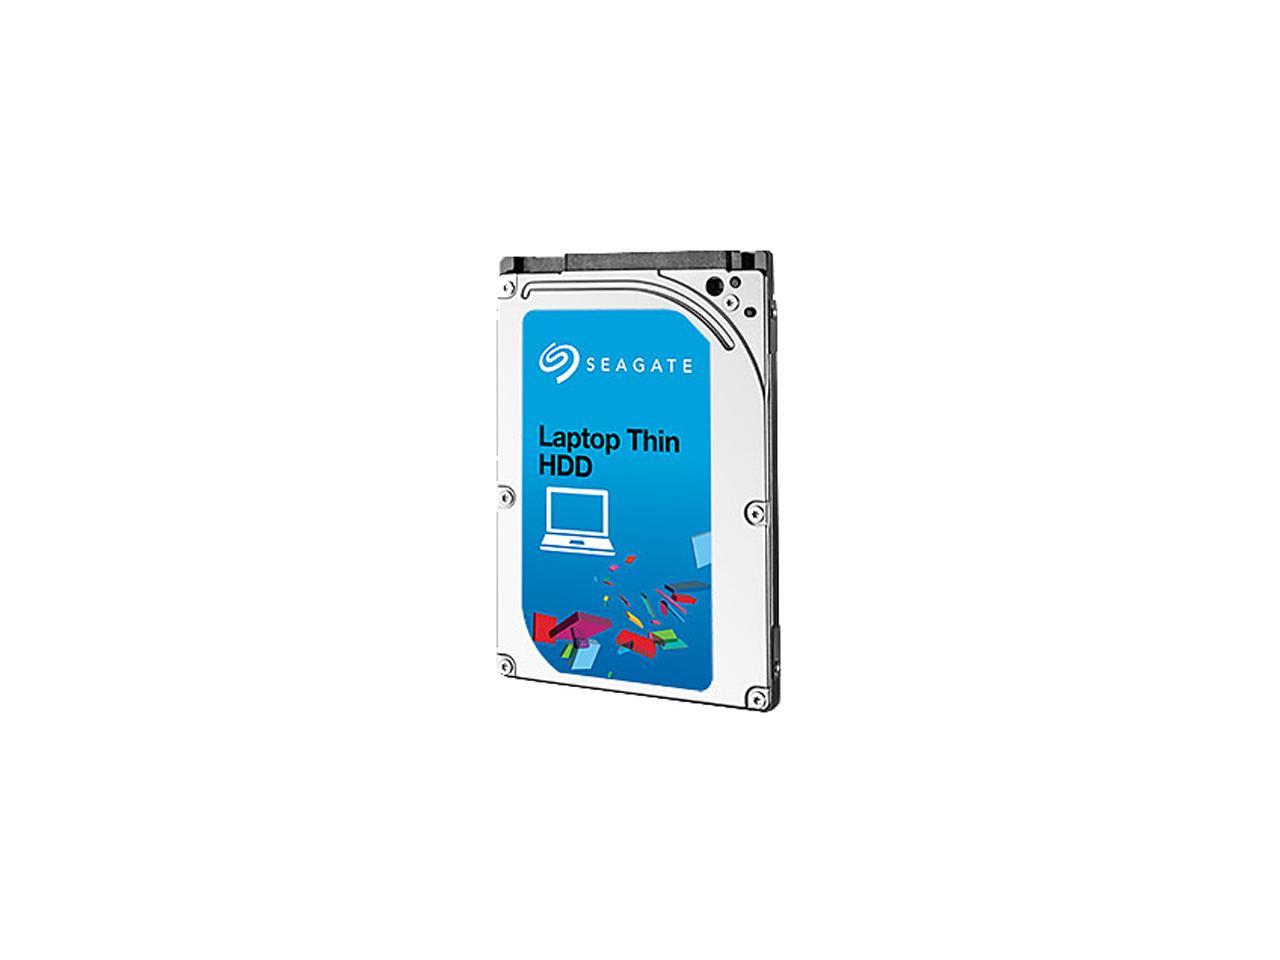 Seagate Laptop Thin Hdd St500Lm024 500Gb 7200 Rpm 32Mb Cache Sata 6.0Gb/S 2.5" Sed Fips 140-2 Secure Encryption Hard Drive